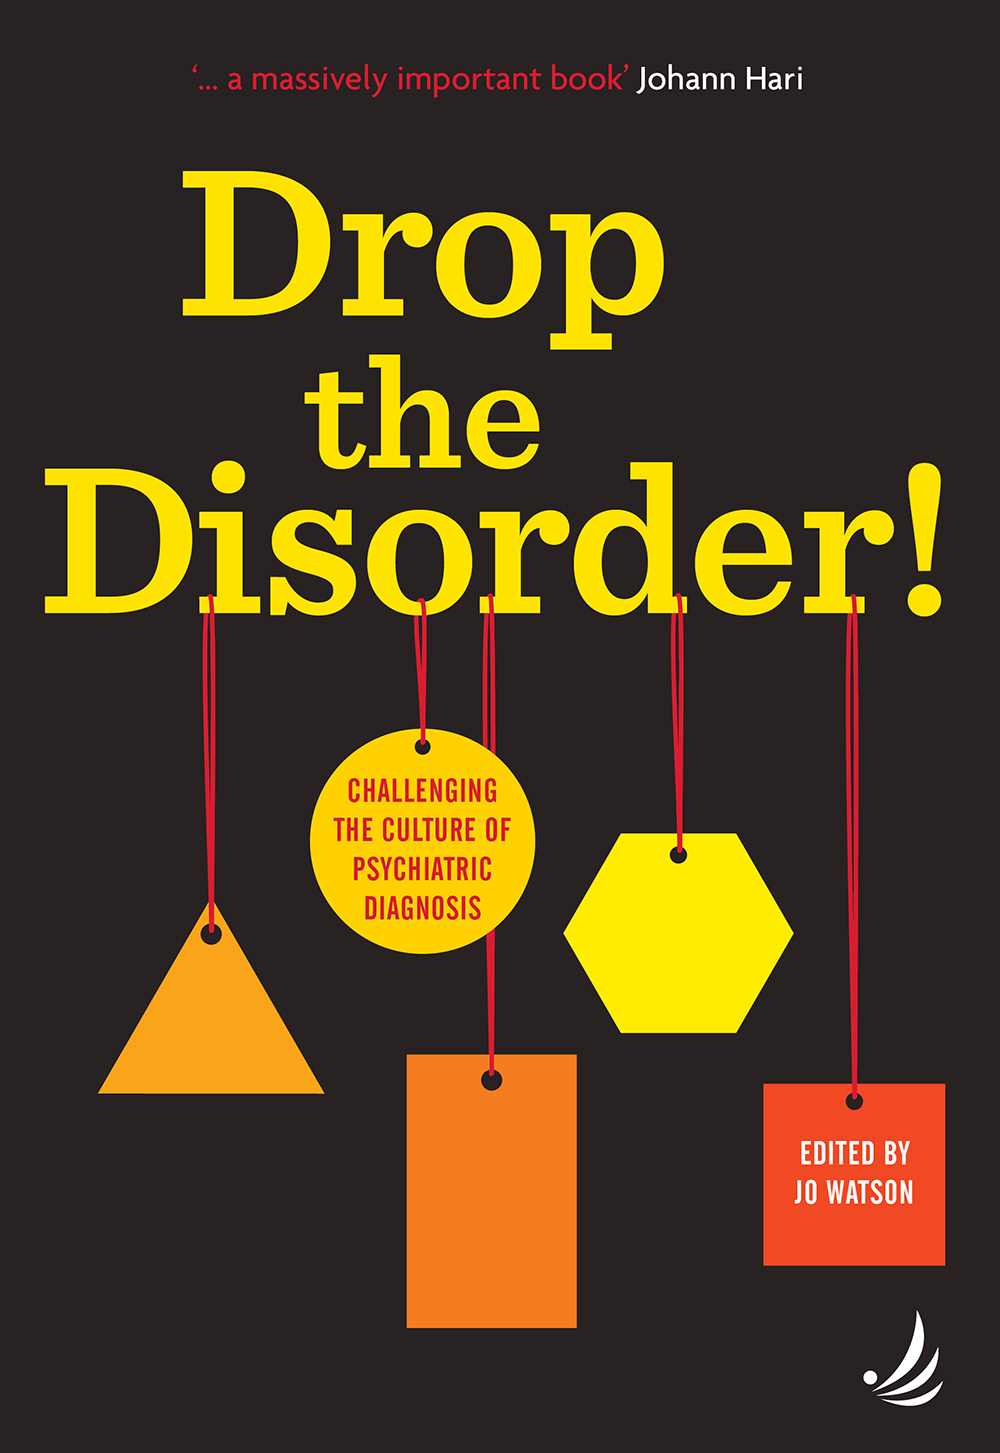 Drop the Disorder! - The Book Launch